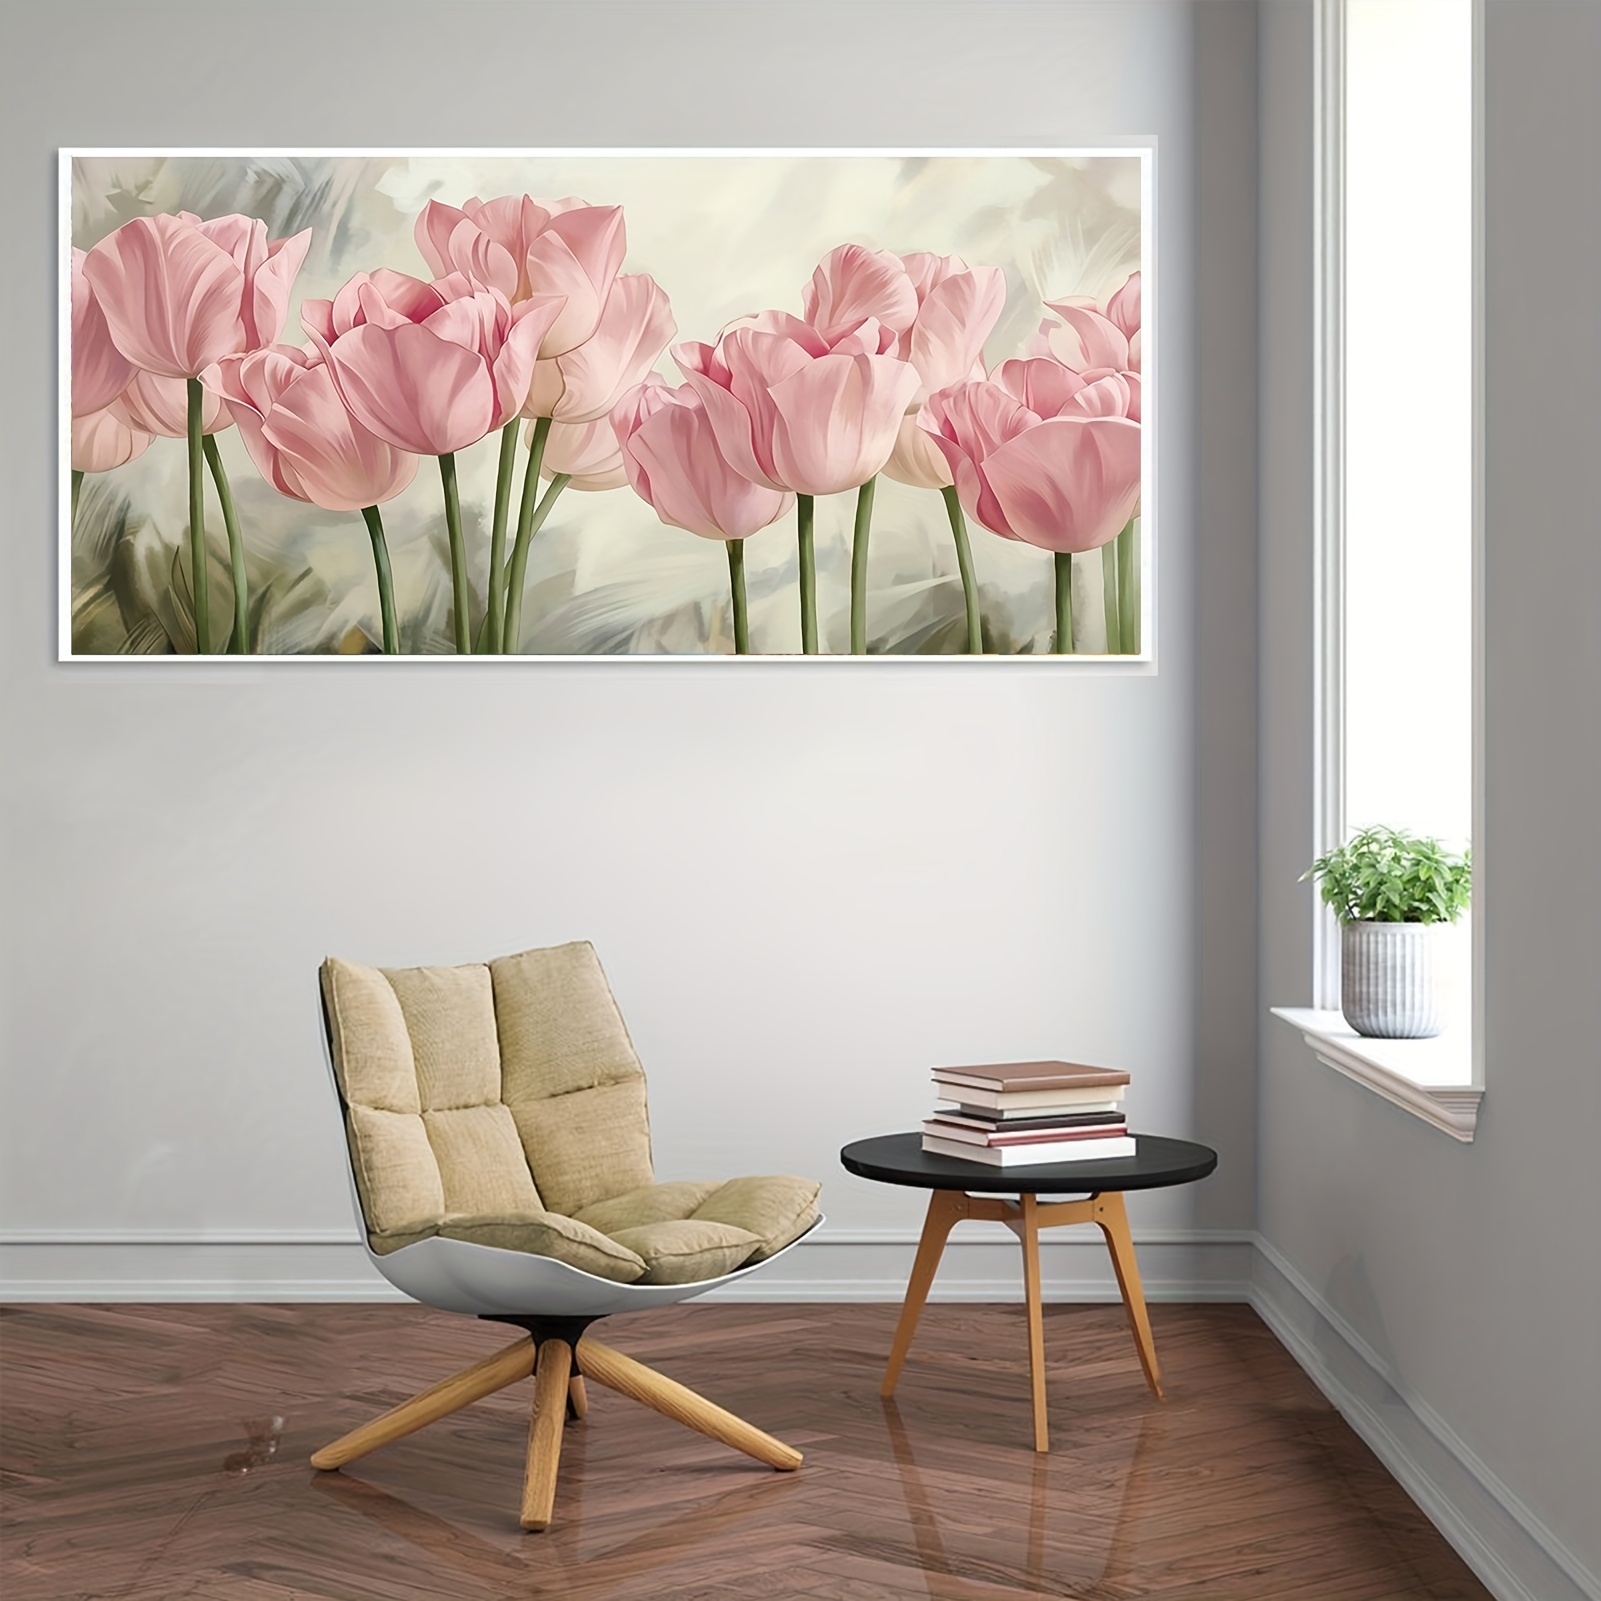 5D DIY Large Diamond Painting Kits 15.7x27.5in/40x70cm Flower Series Round  Full Diamond Diamond Art Kits Picture By Number Kits For Home Wall Decor